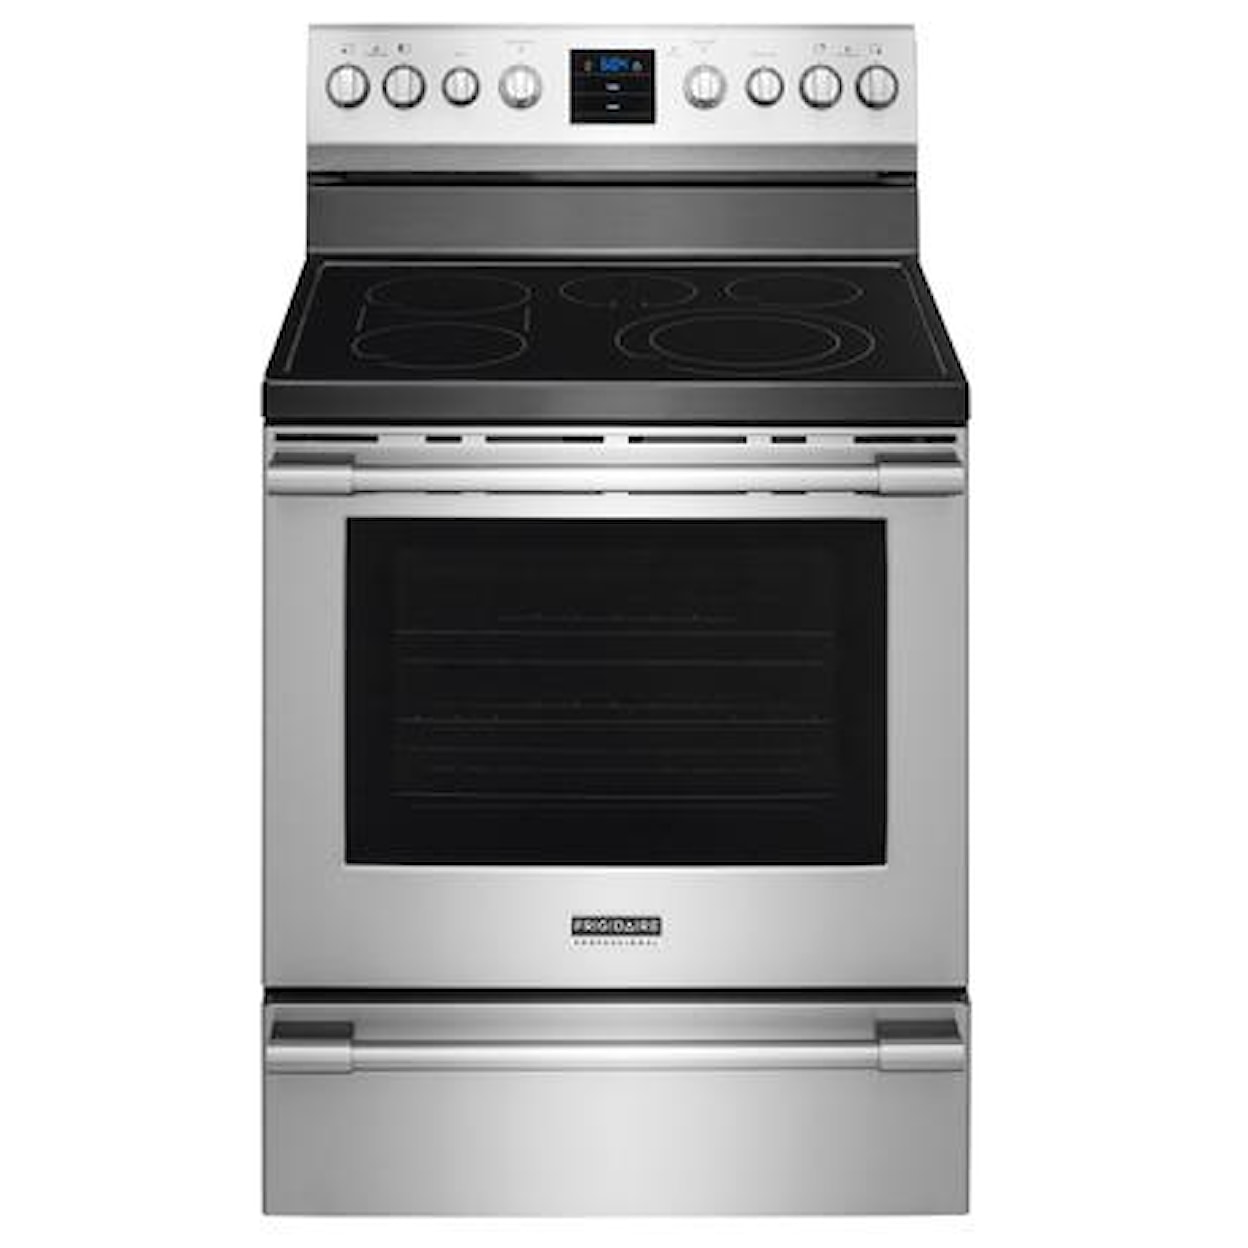 Frigidaire Professional Collection - Ranges Professional 30" Freestanding Electric Range